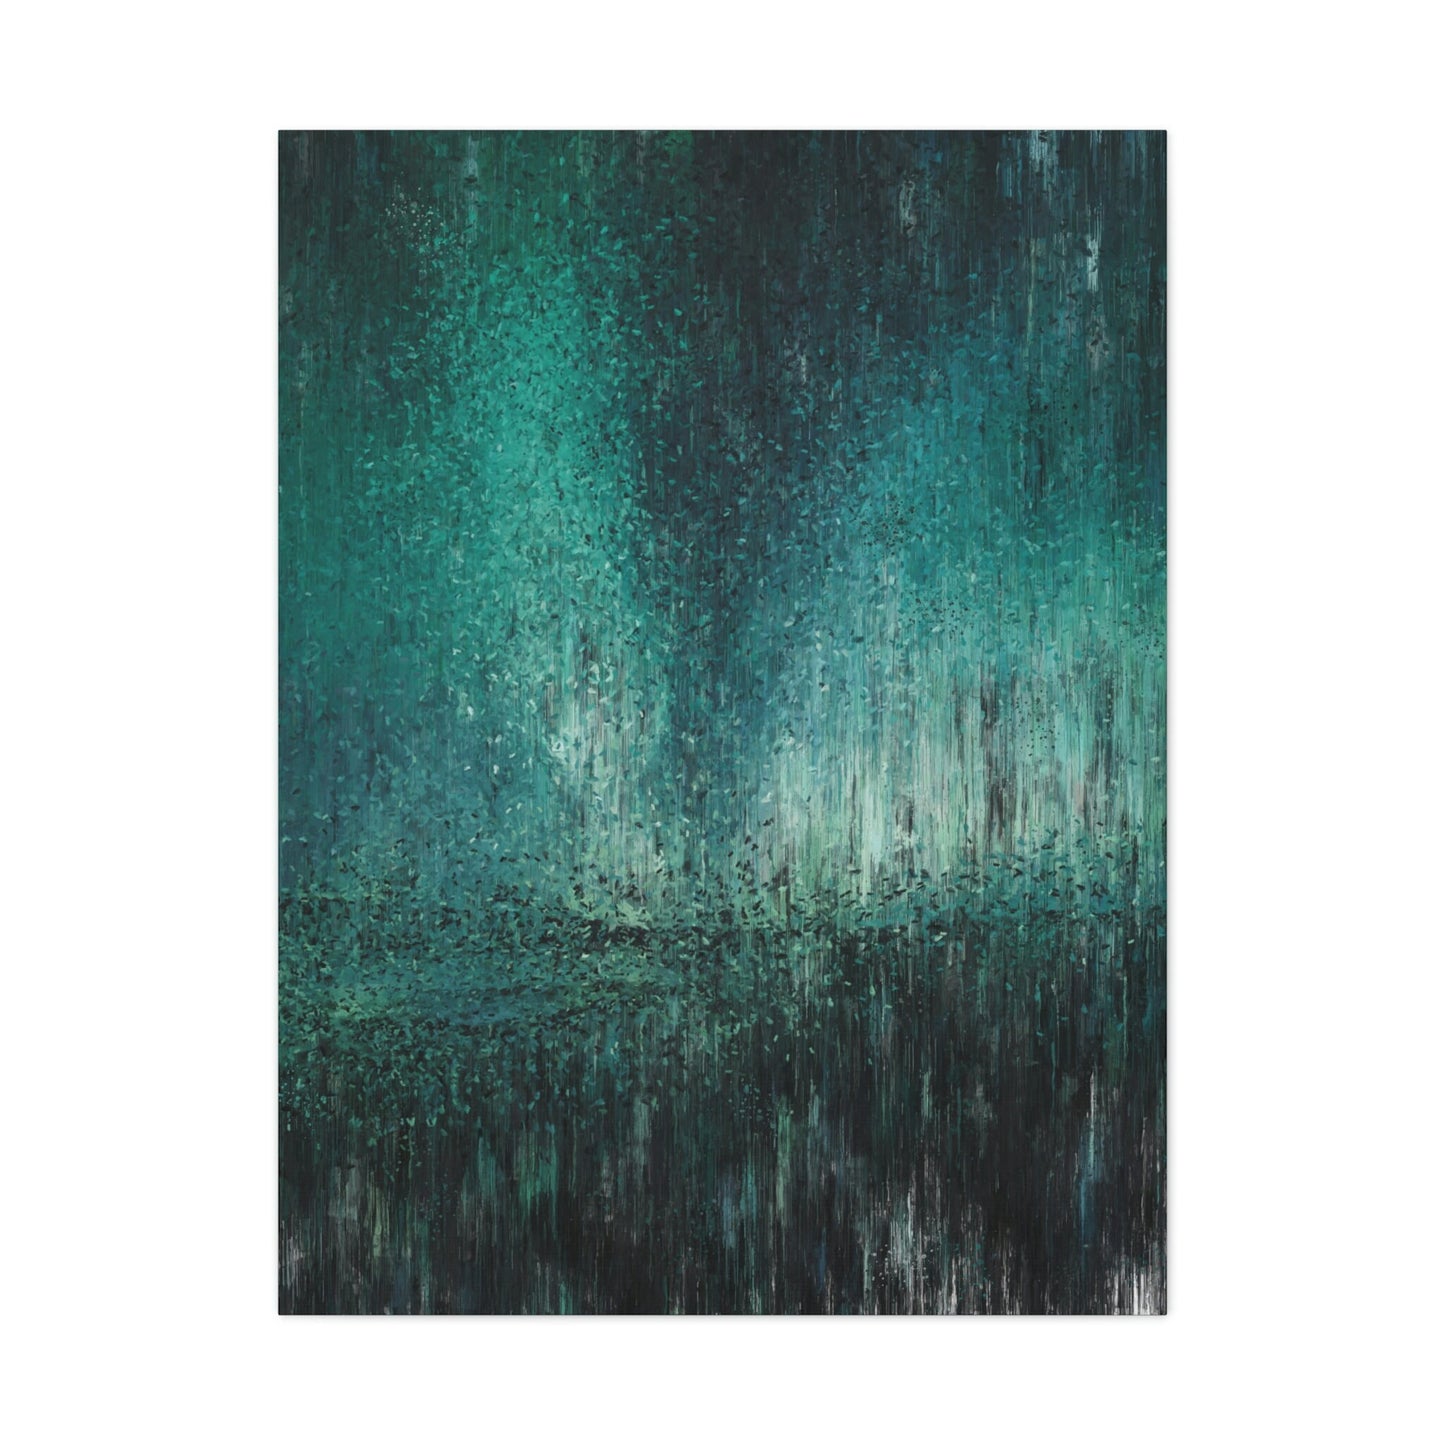 Teal and Black Abstract Wall Art, Canvas Print